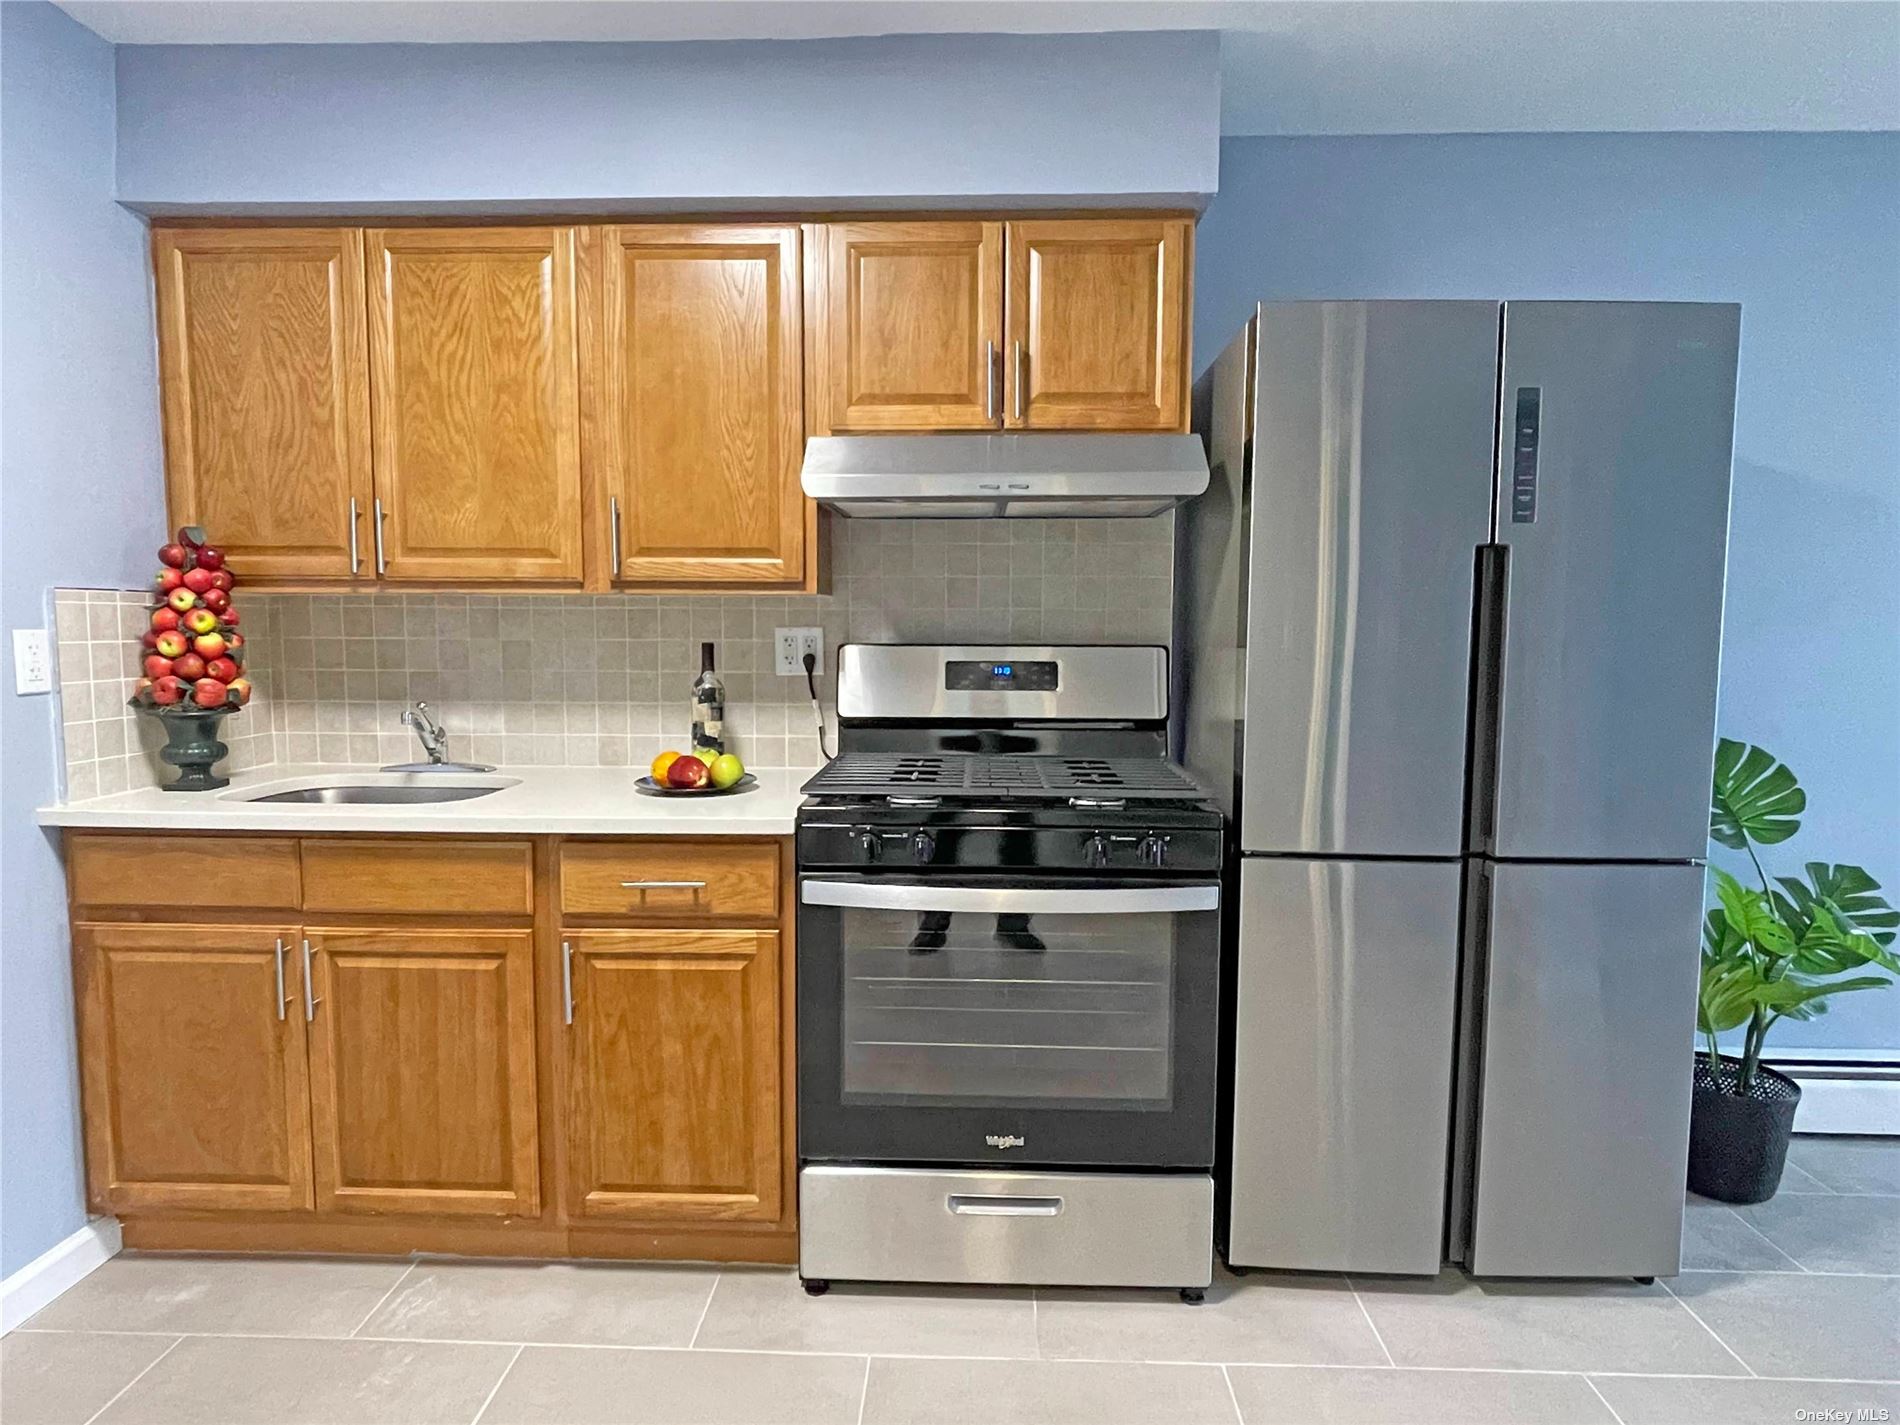 Apartment in Whitestone - Clintonvelle  Queens, NY 11357